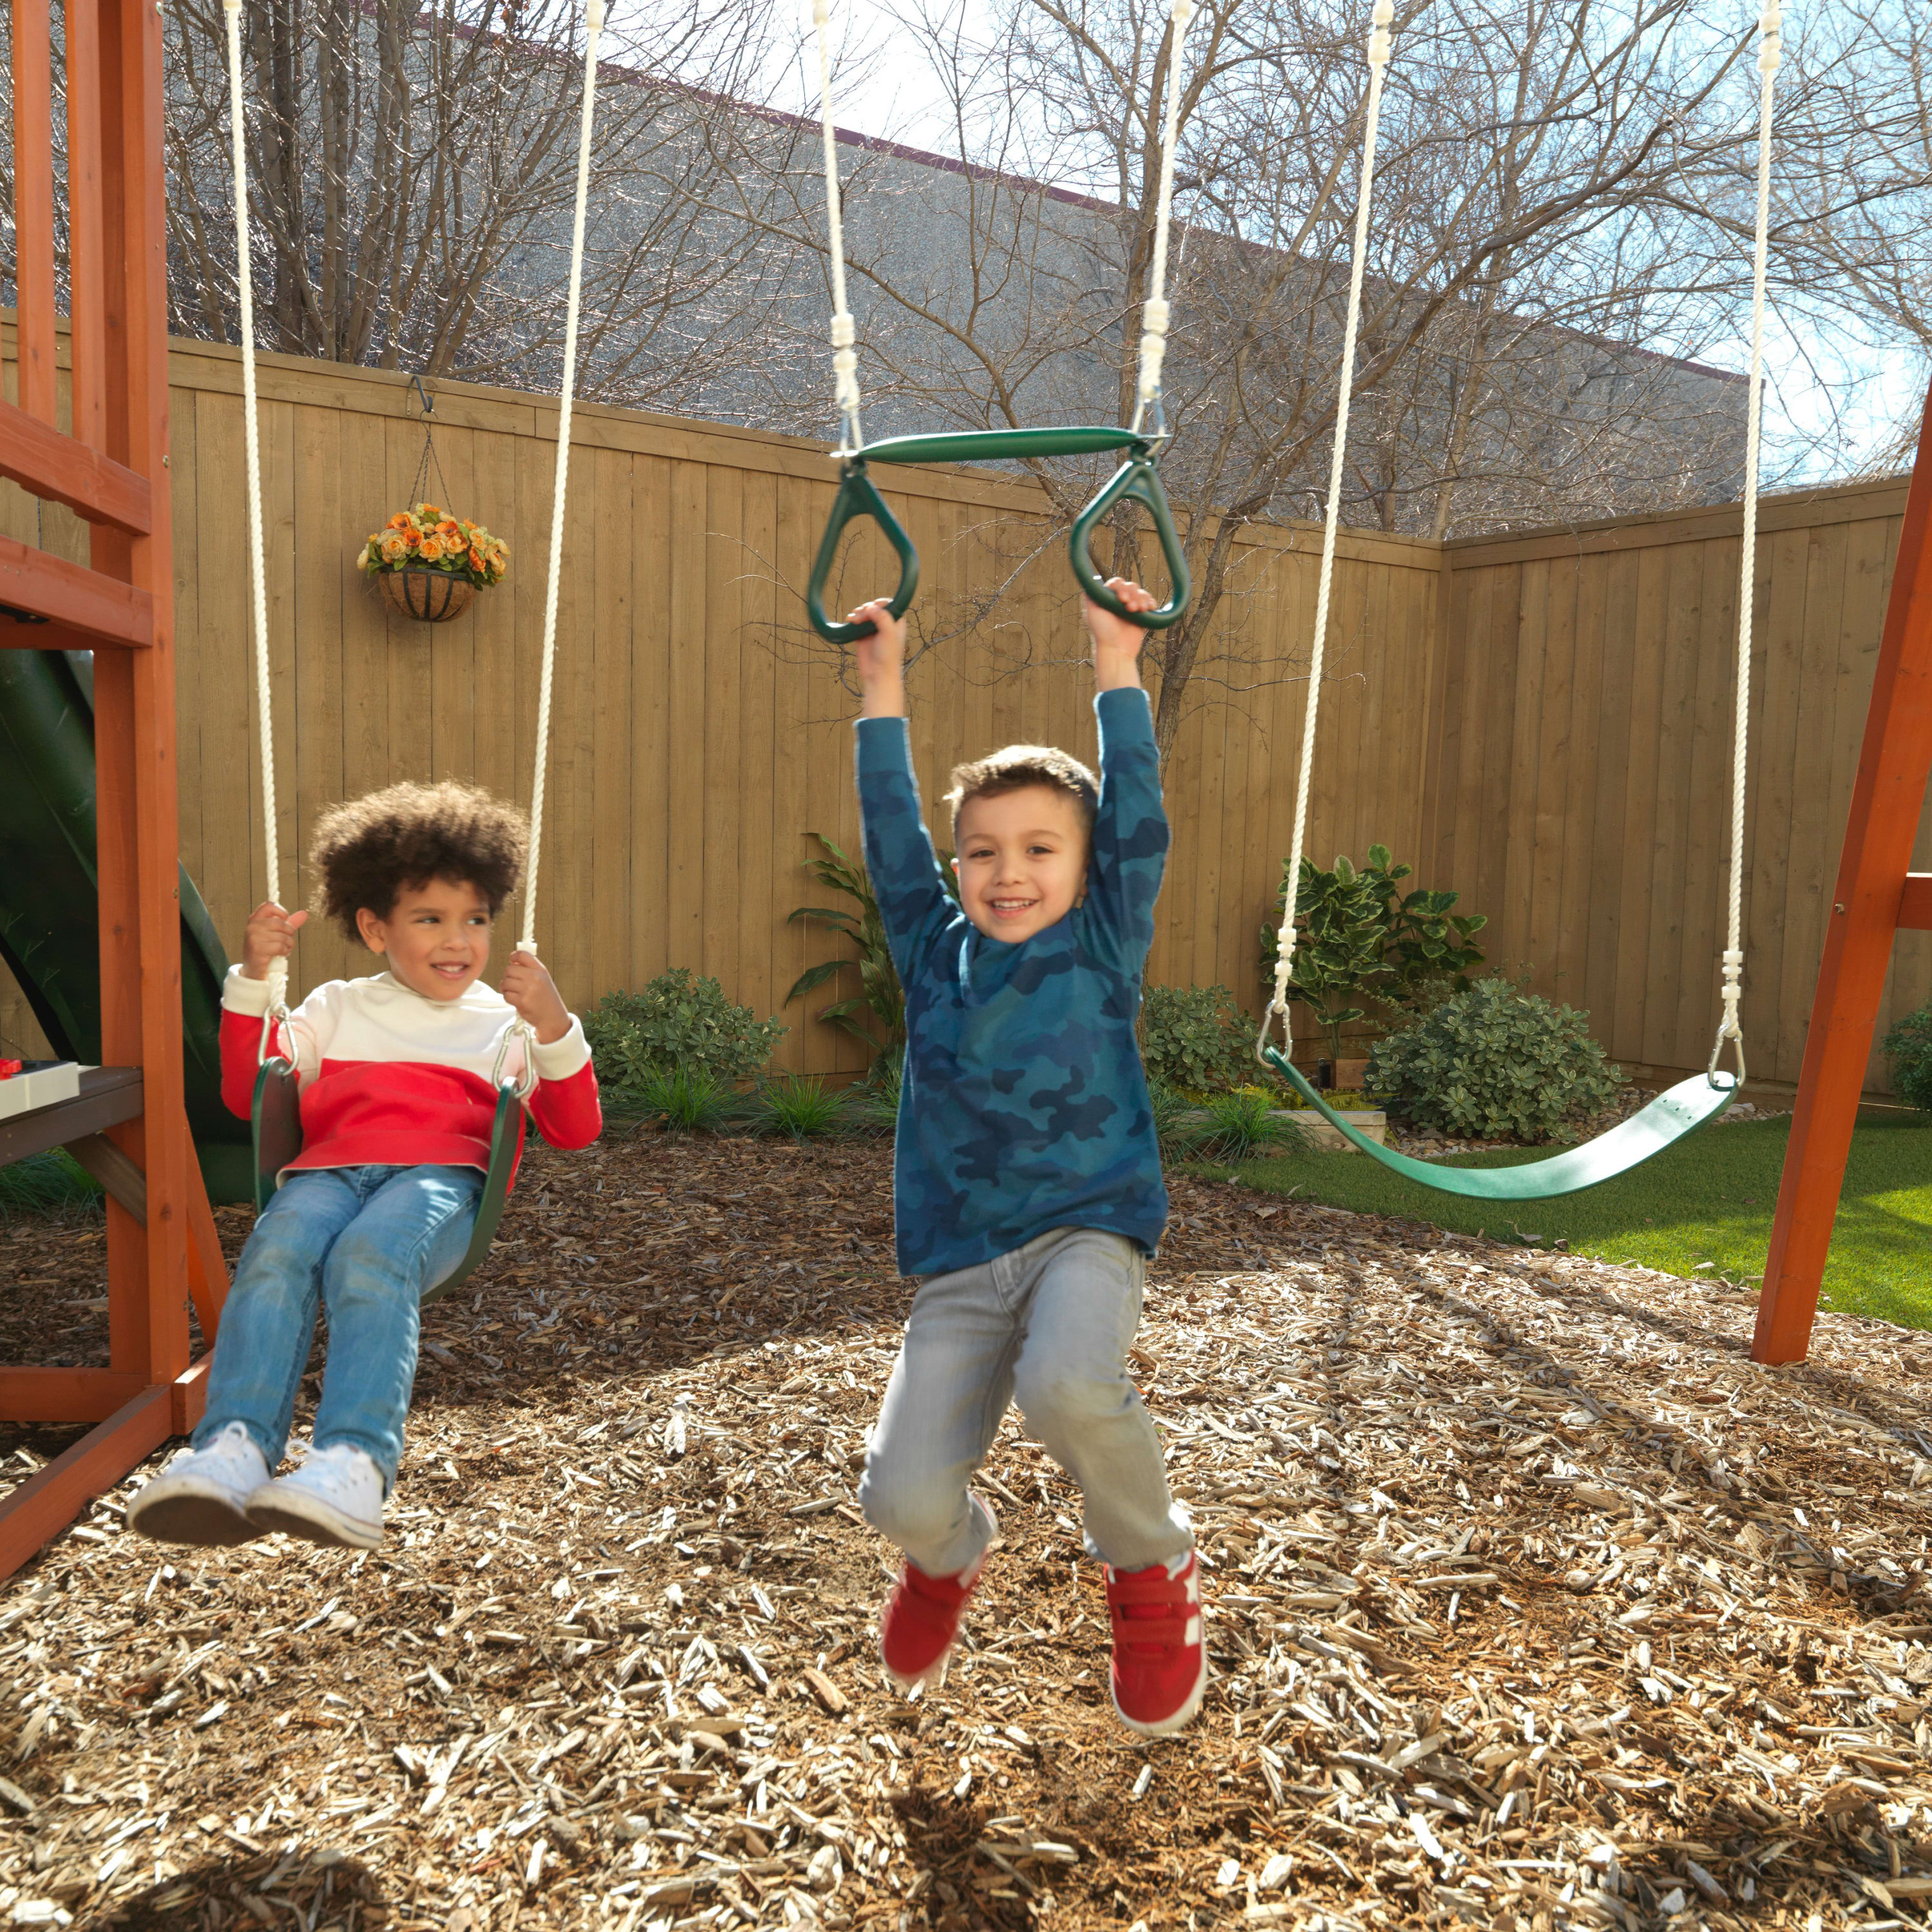 KidKraft Austin Wooden Outdoor Swing Set with Slides, Swings, Kitchen and Rock Wall - image 14 of 27